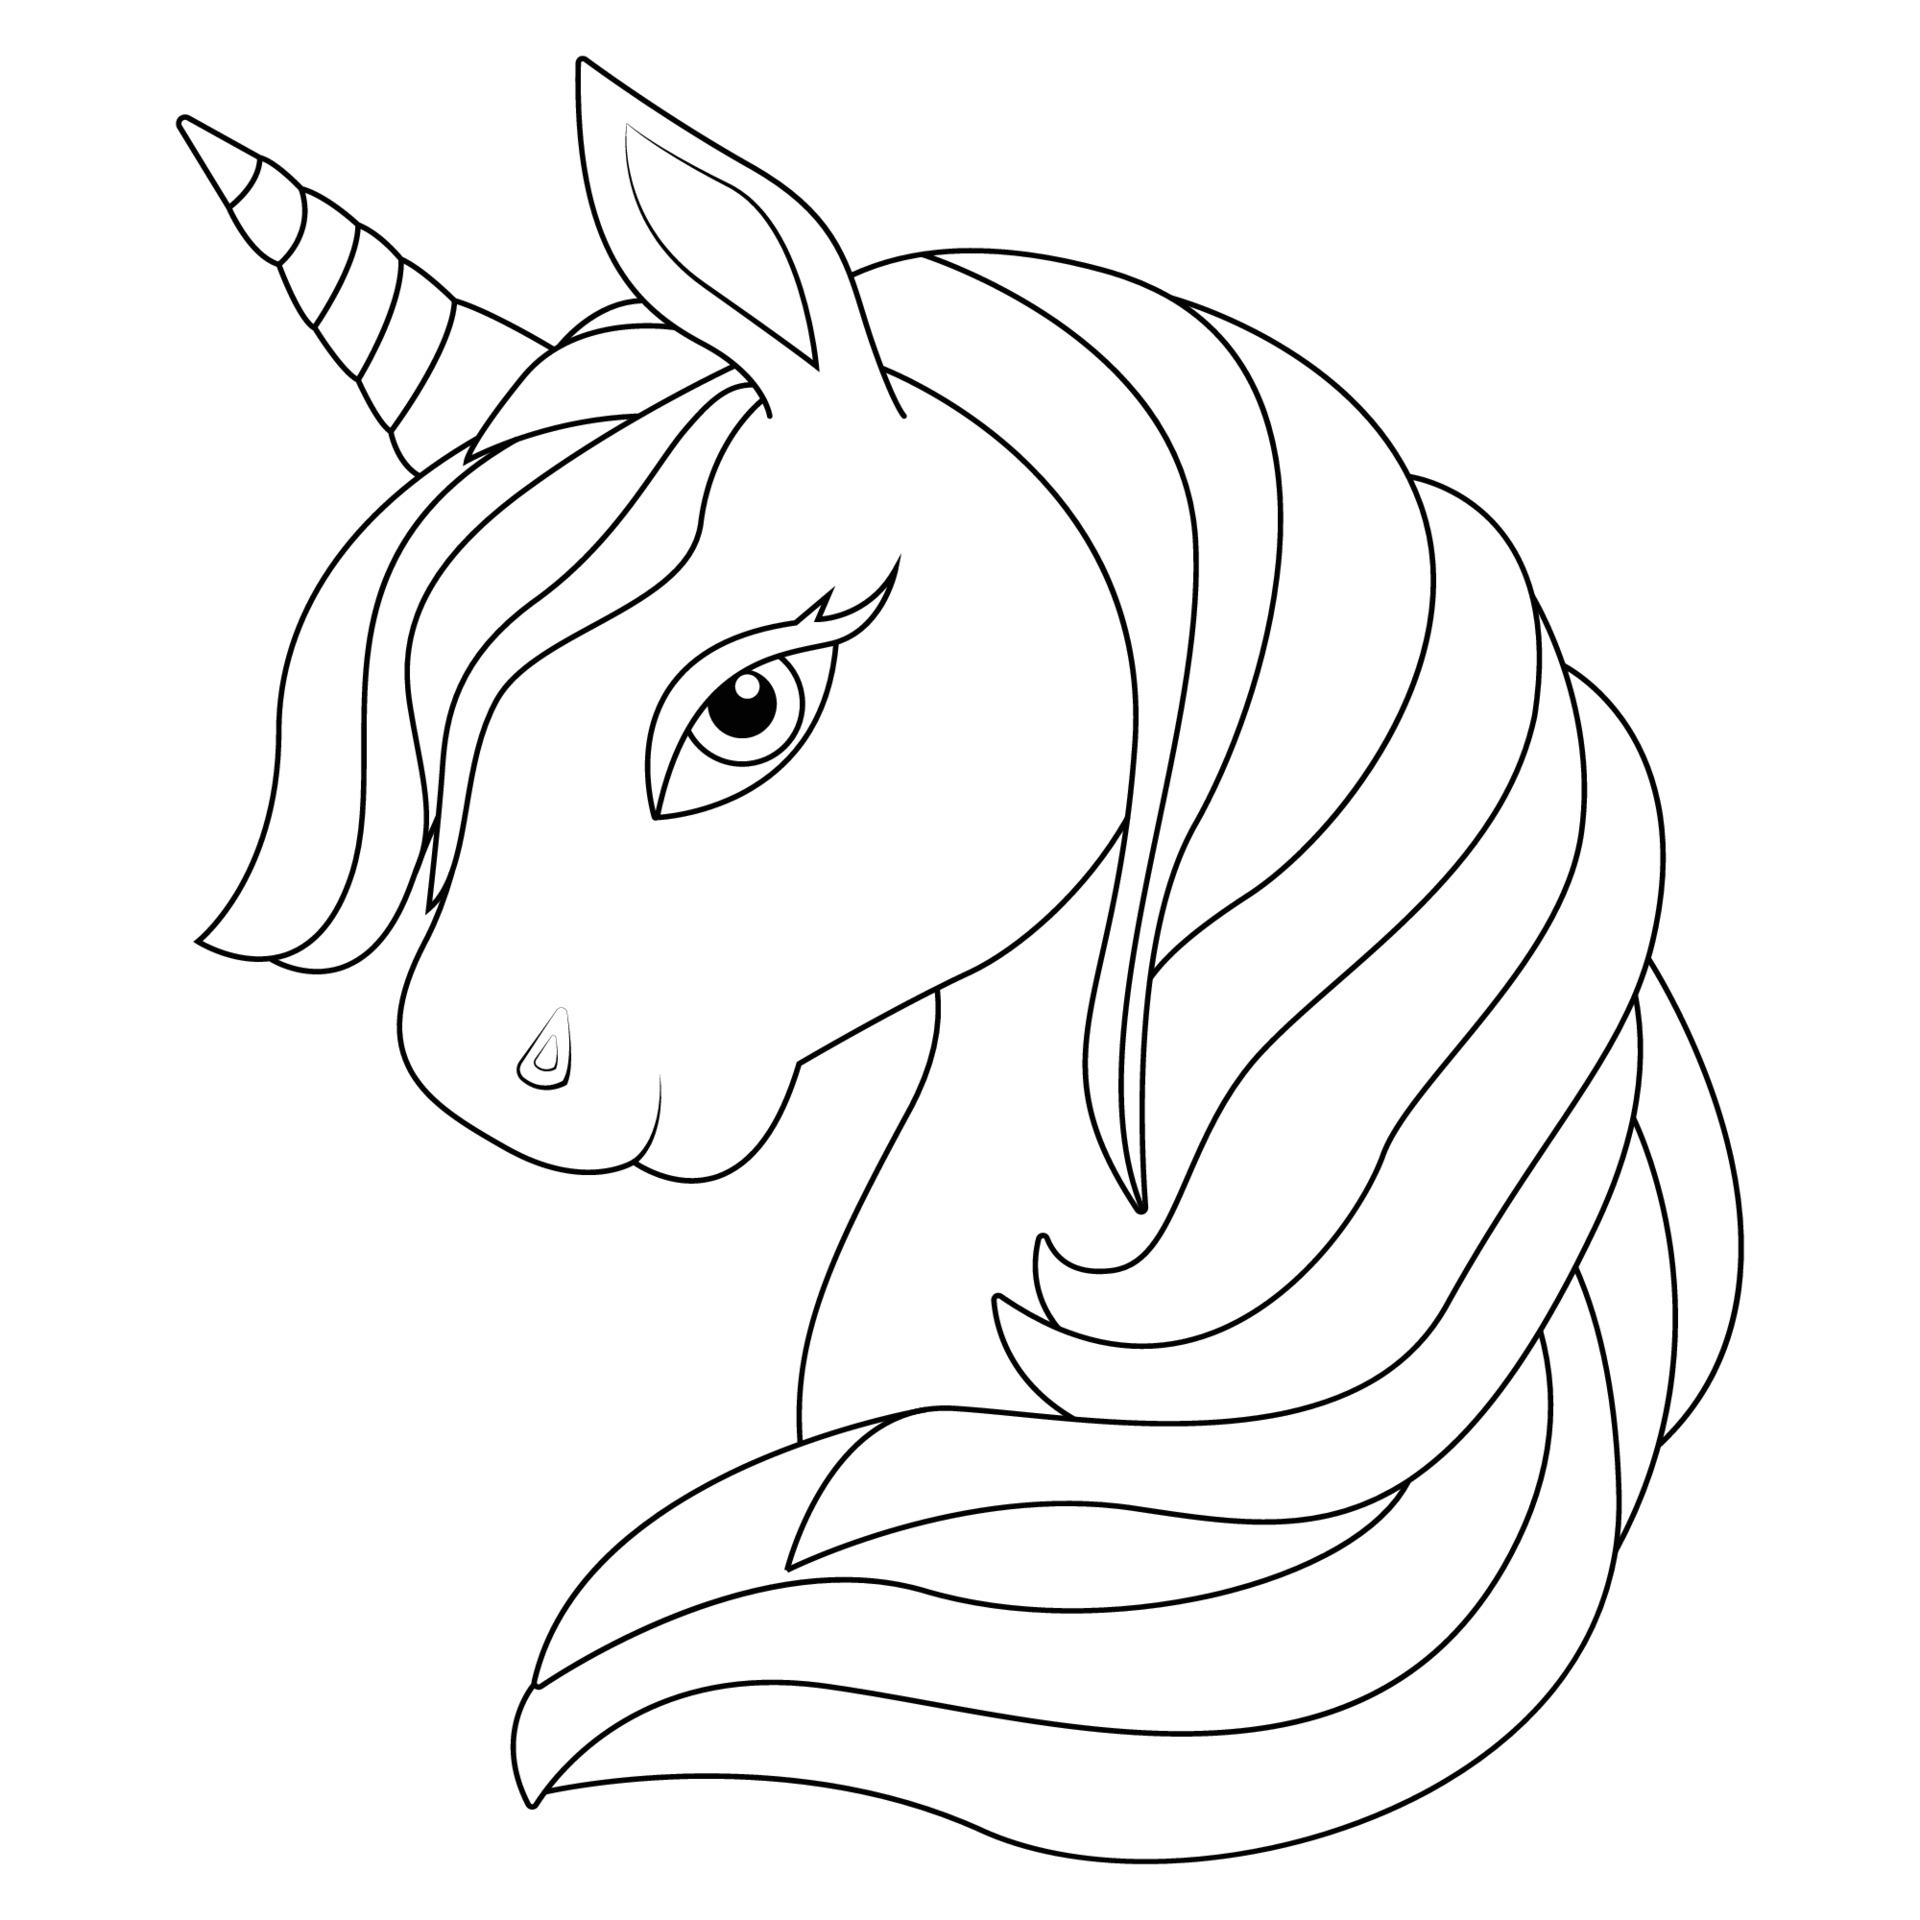 Cute Unicorn Coloring Page For Kids 20 Vector Art at Vecteezy